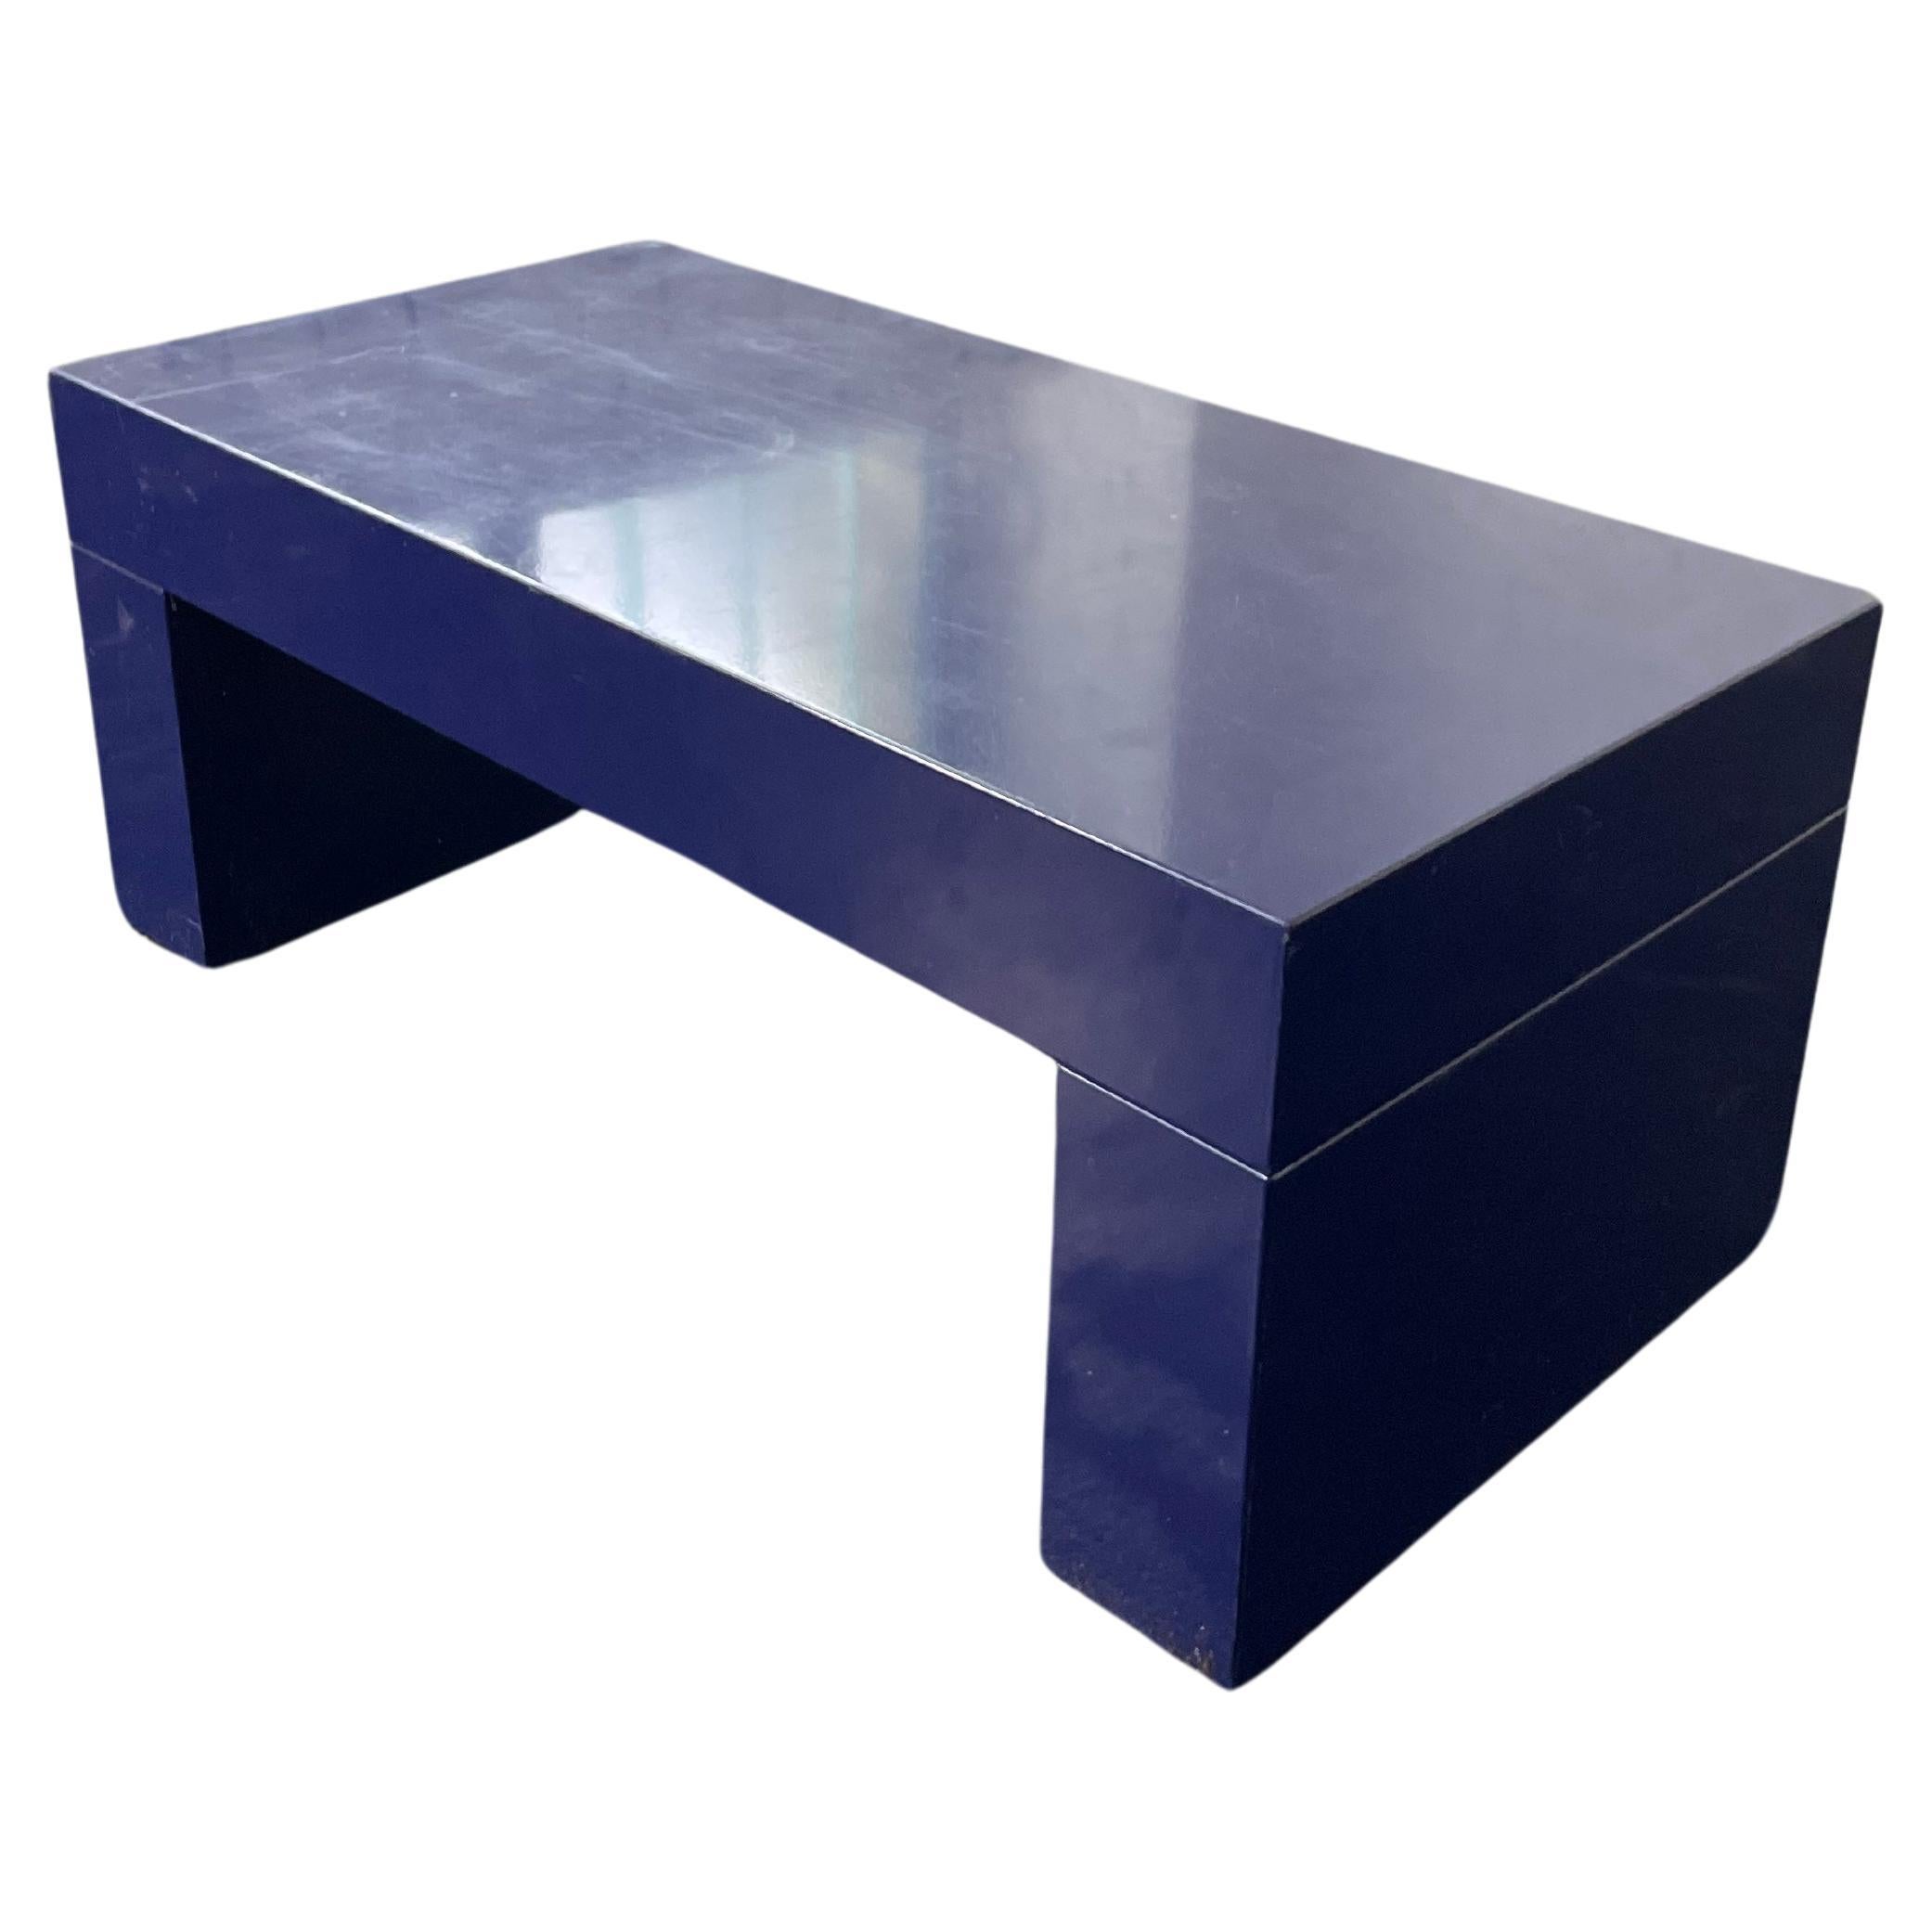 Table/ Blue bench in the style of Massimo Vignelli for Heller circa 2010 For Sale